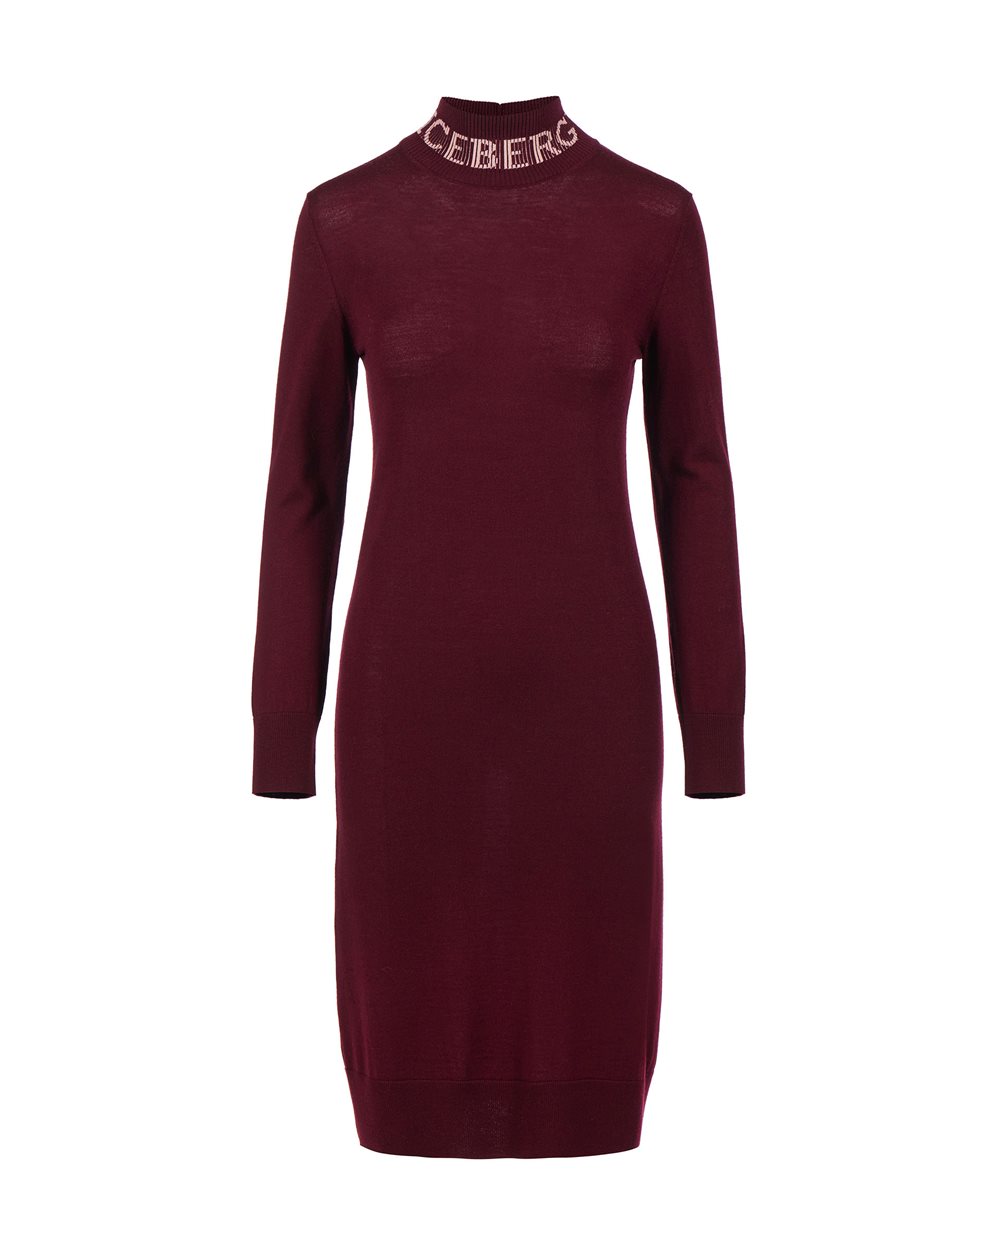 Knit dress with logo | Iceberg - Official Website